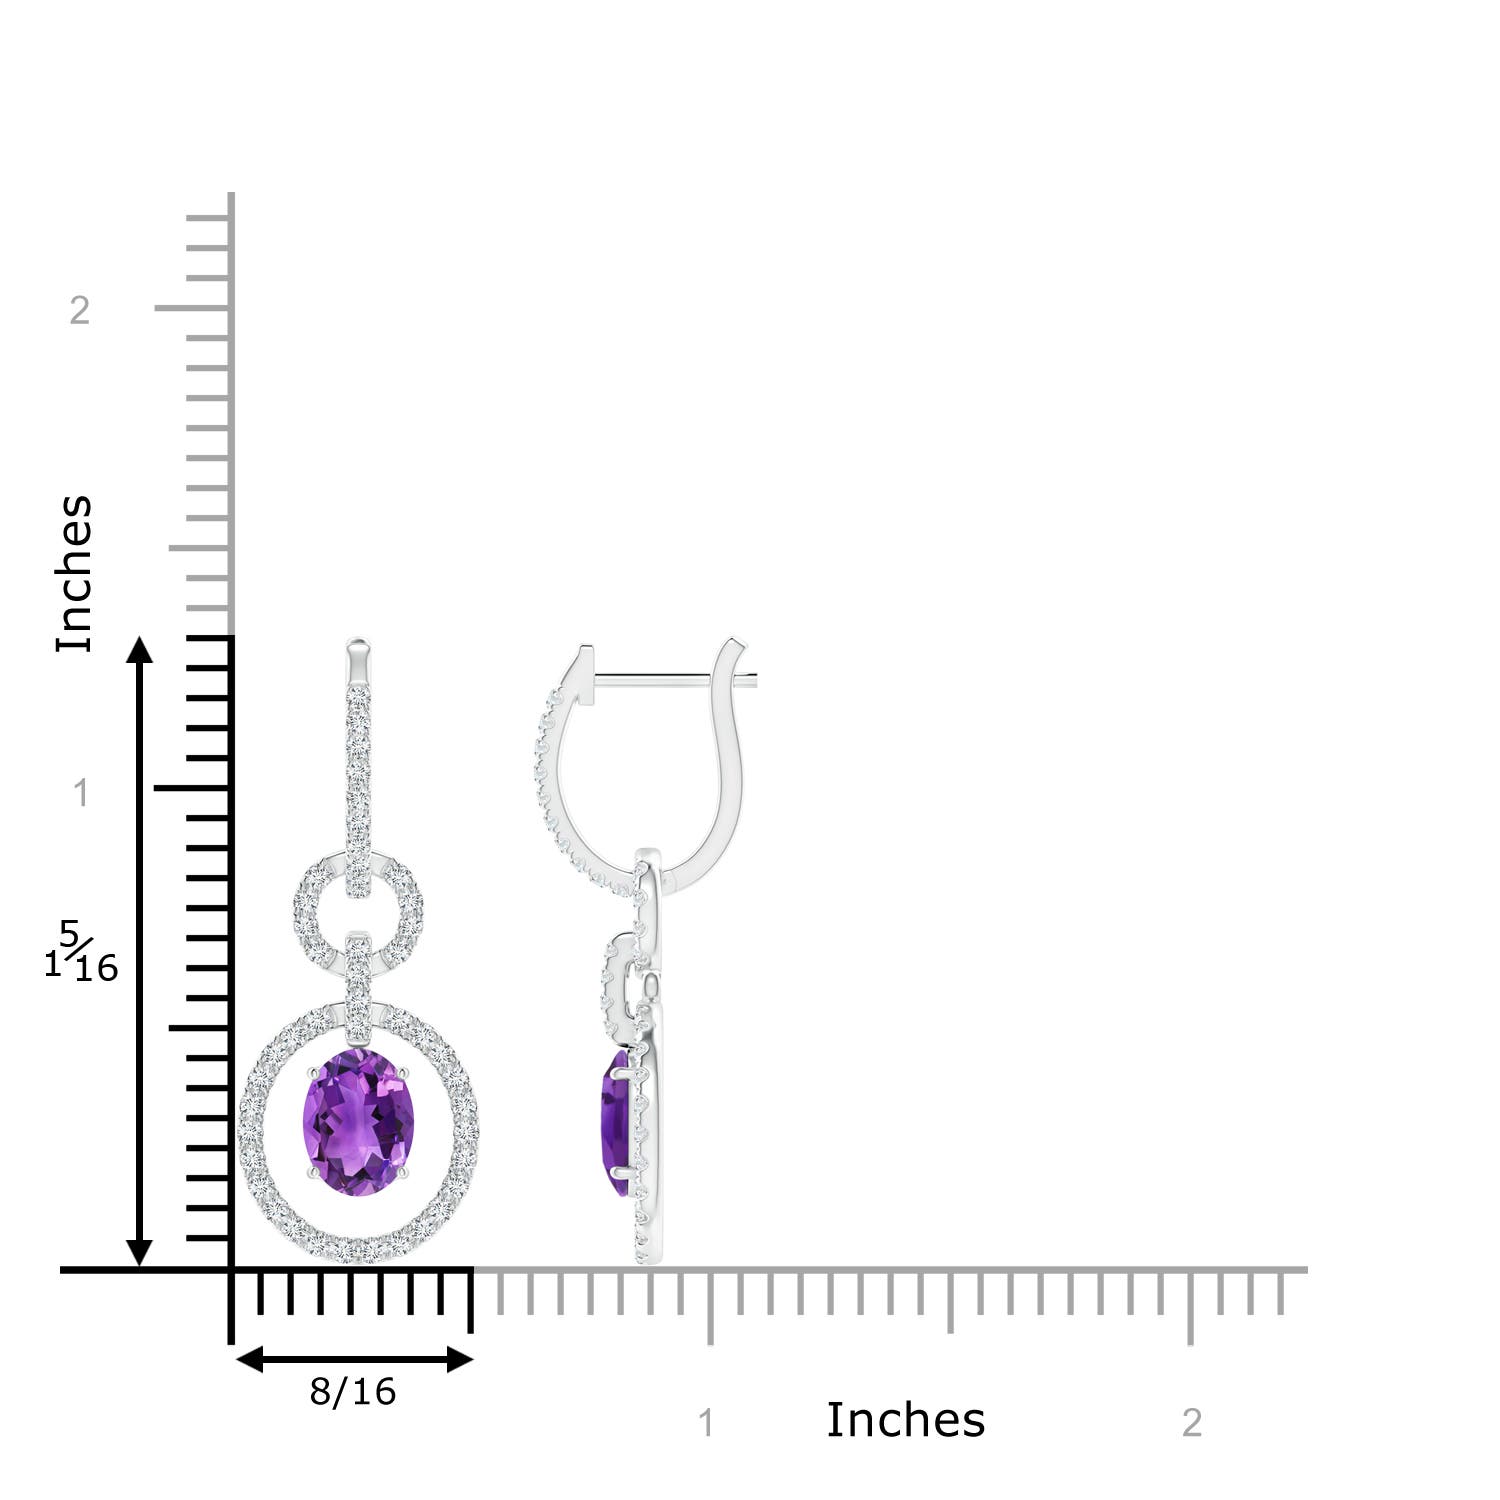 AAA - Amethyst / 3.08 CT / 14 KT White Gold